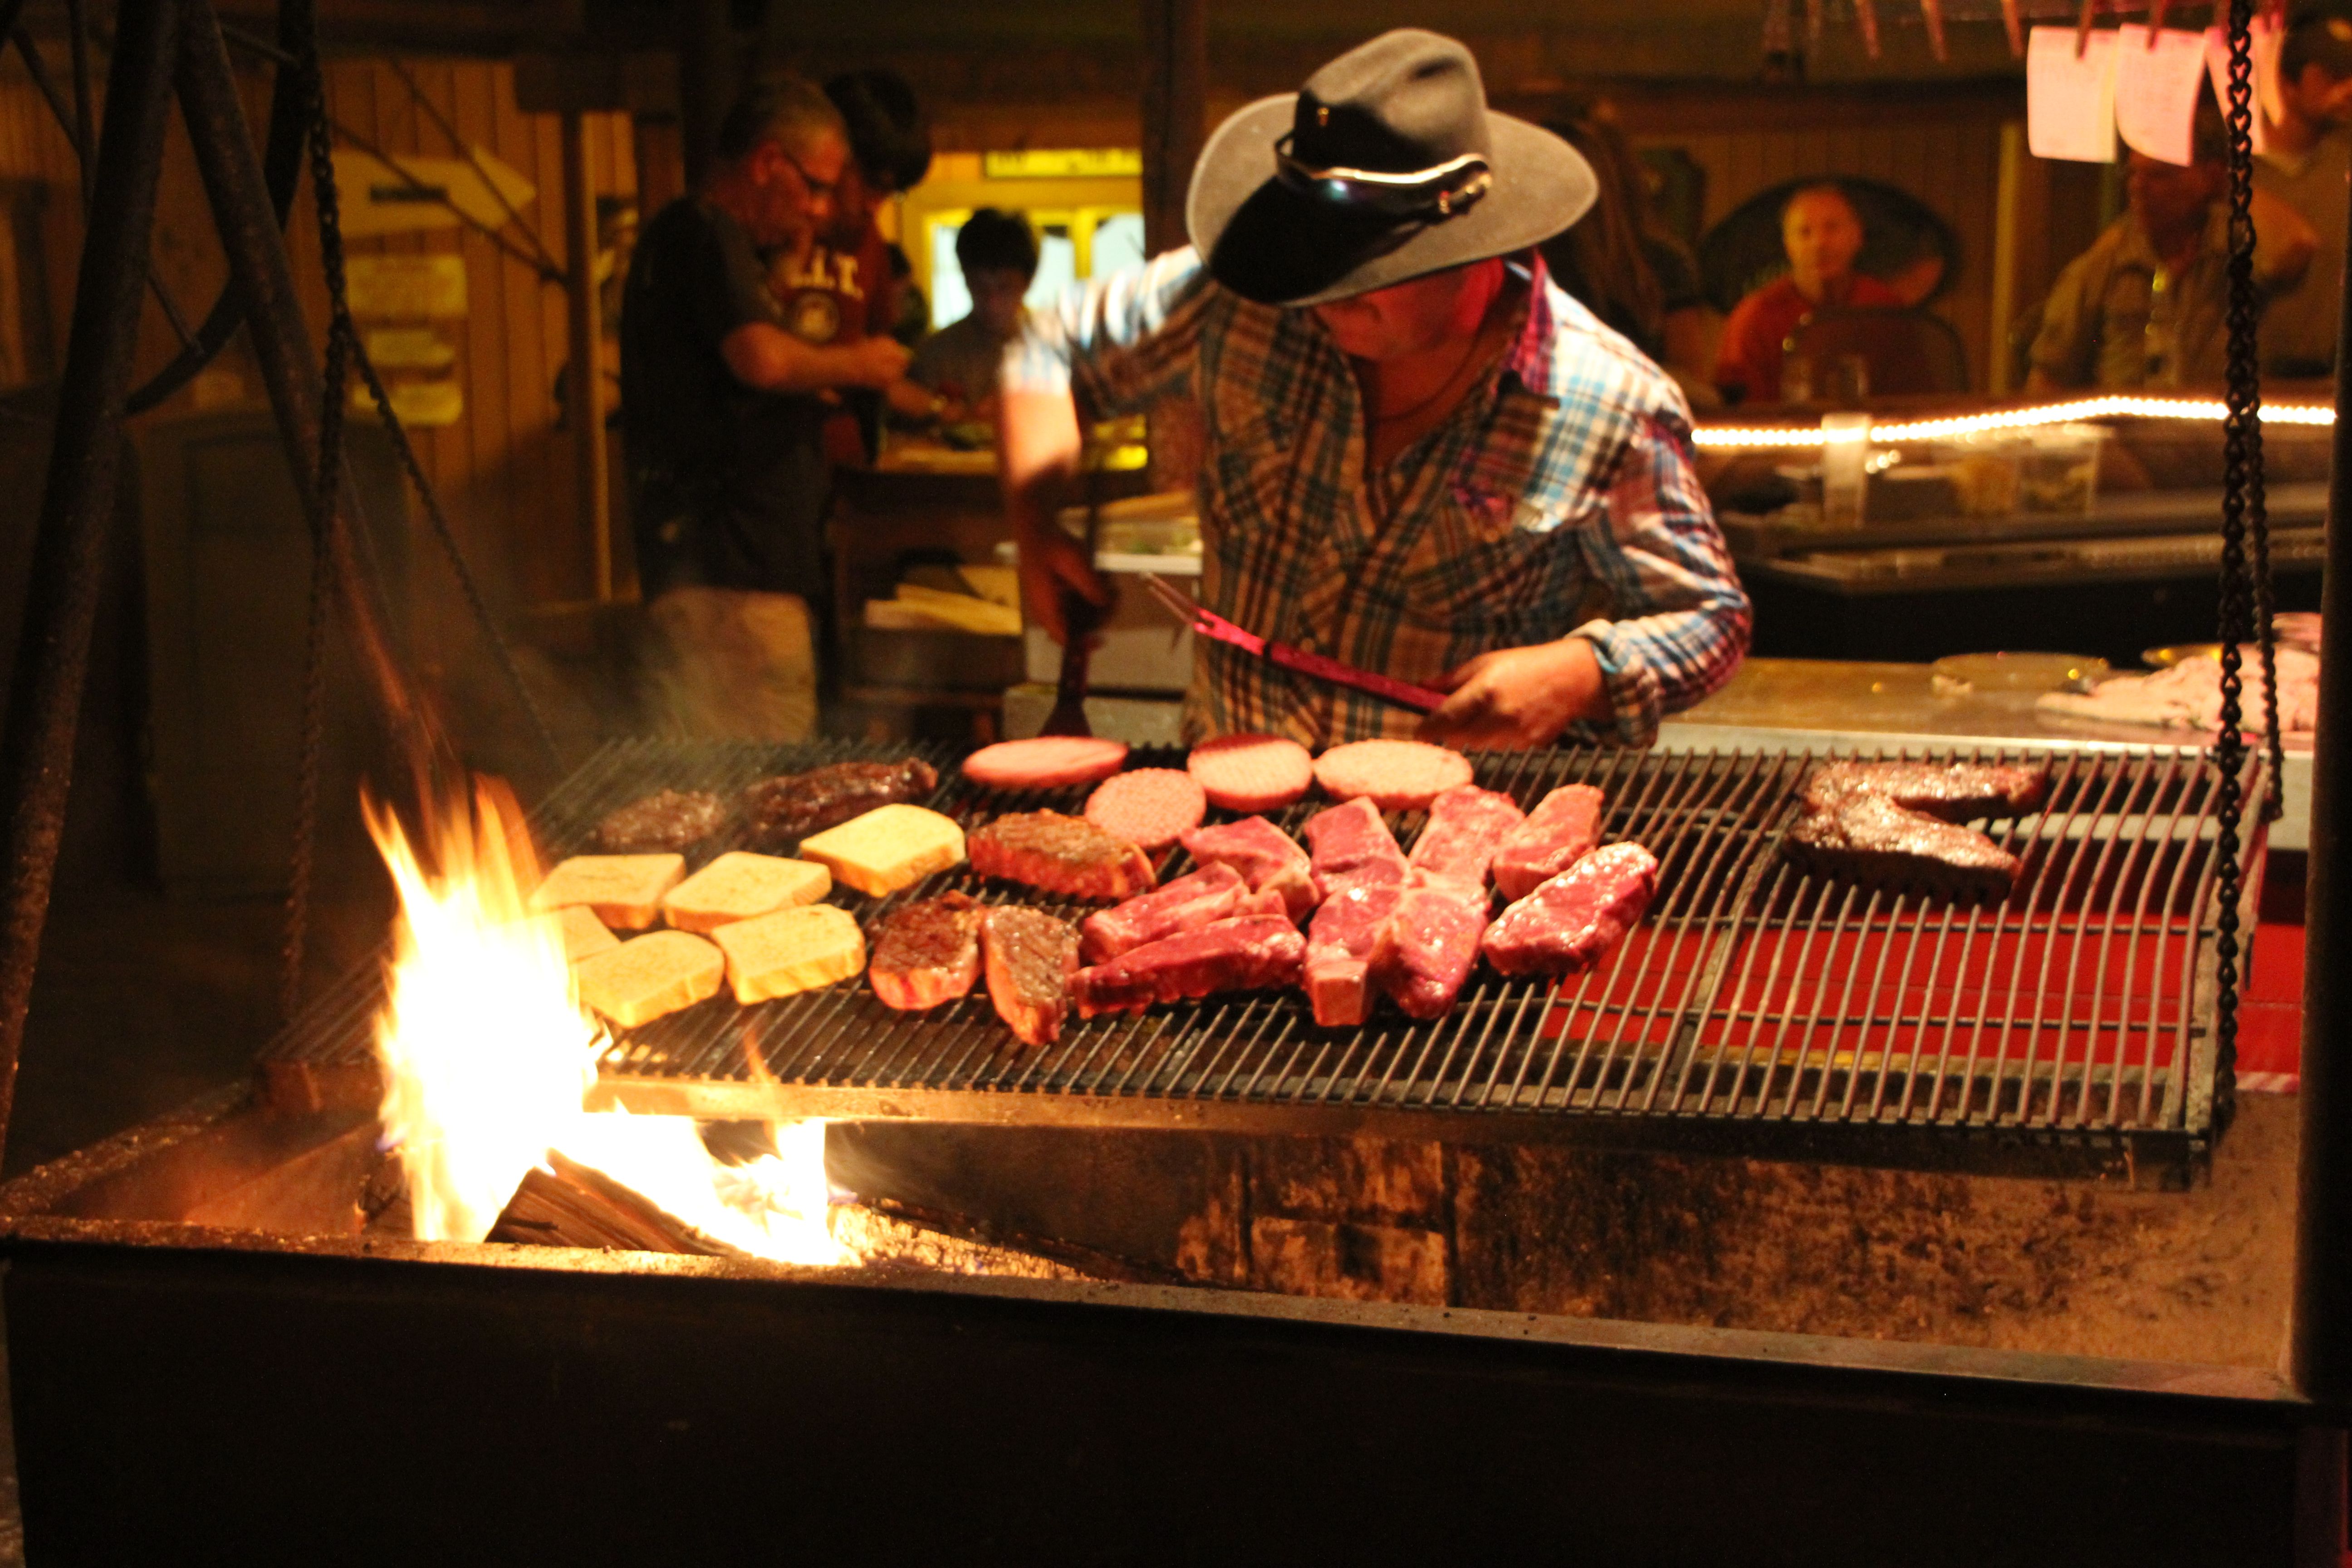 Bloomer reccomend Mexican hat lodge and swinging steak